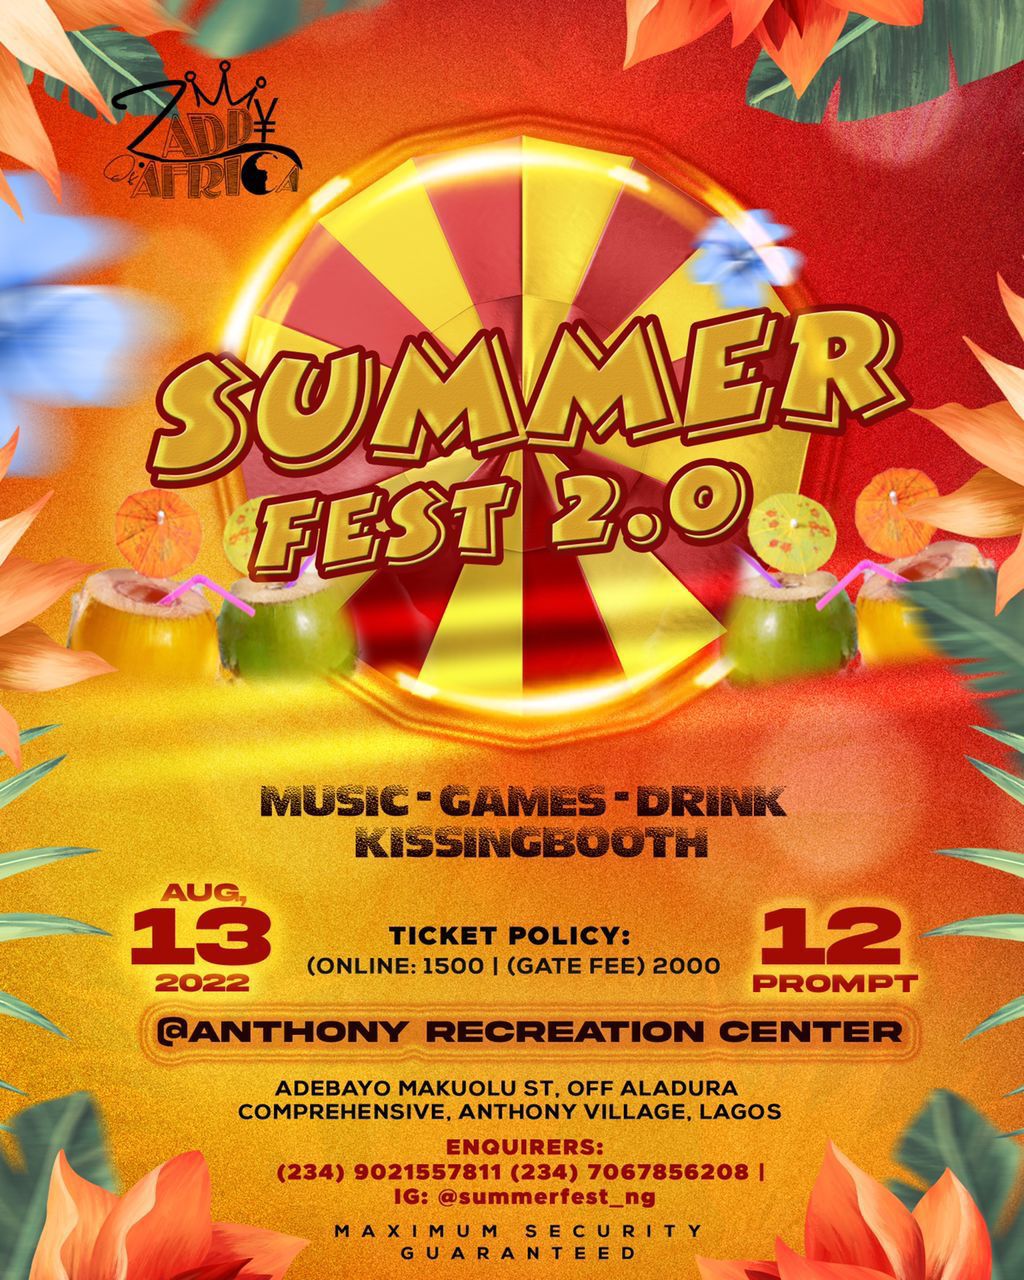 Summer Fest Post free event in Nigeria using tickethub.ng, buy and sell tickets to event